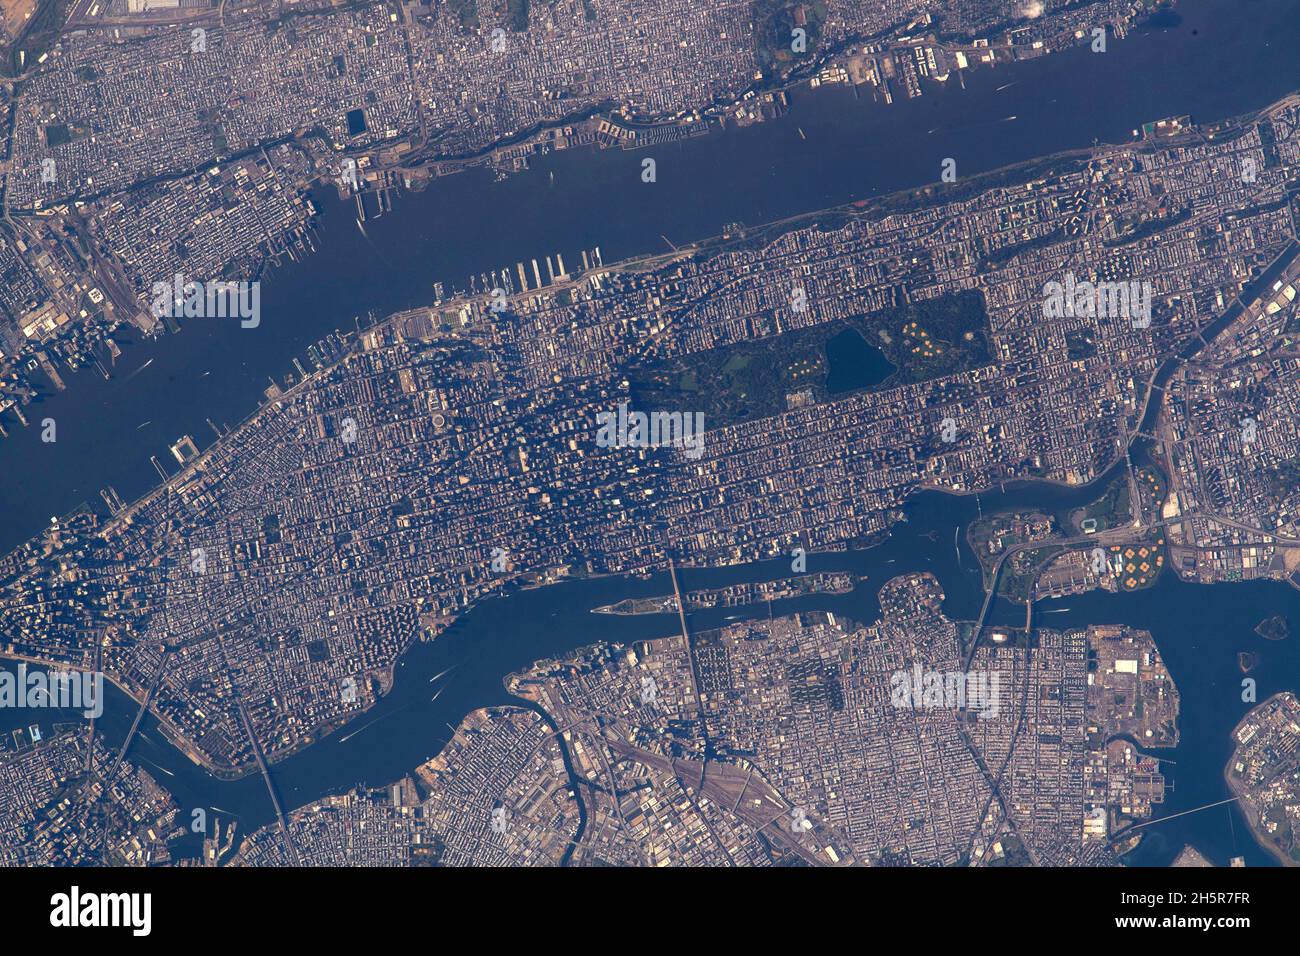 NEW YORK, USA - 15 October 2021 - Central Park figures prominently in this photograph of Manhattan Island in New York City as the International Space Stock Photo